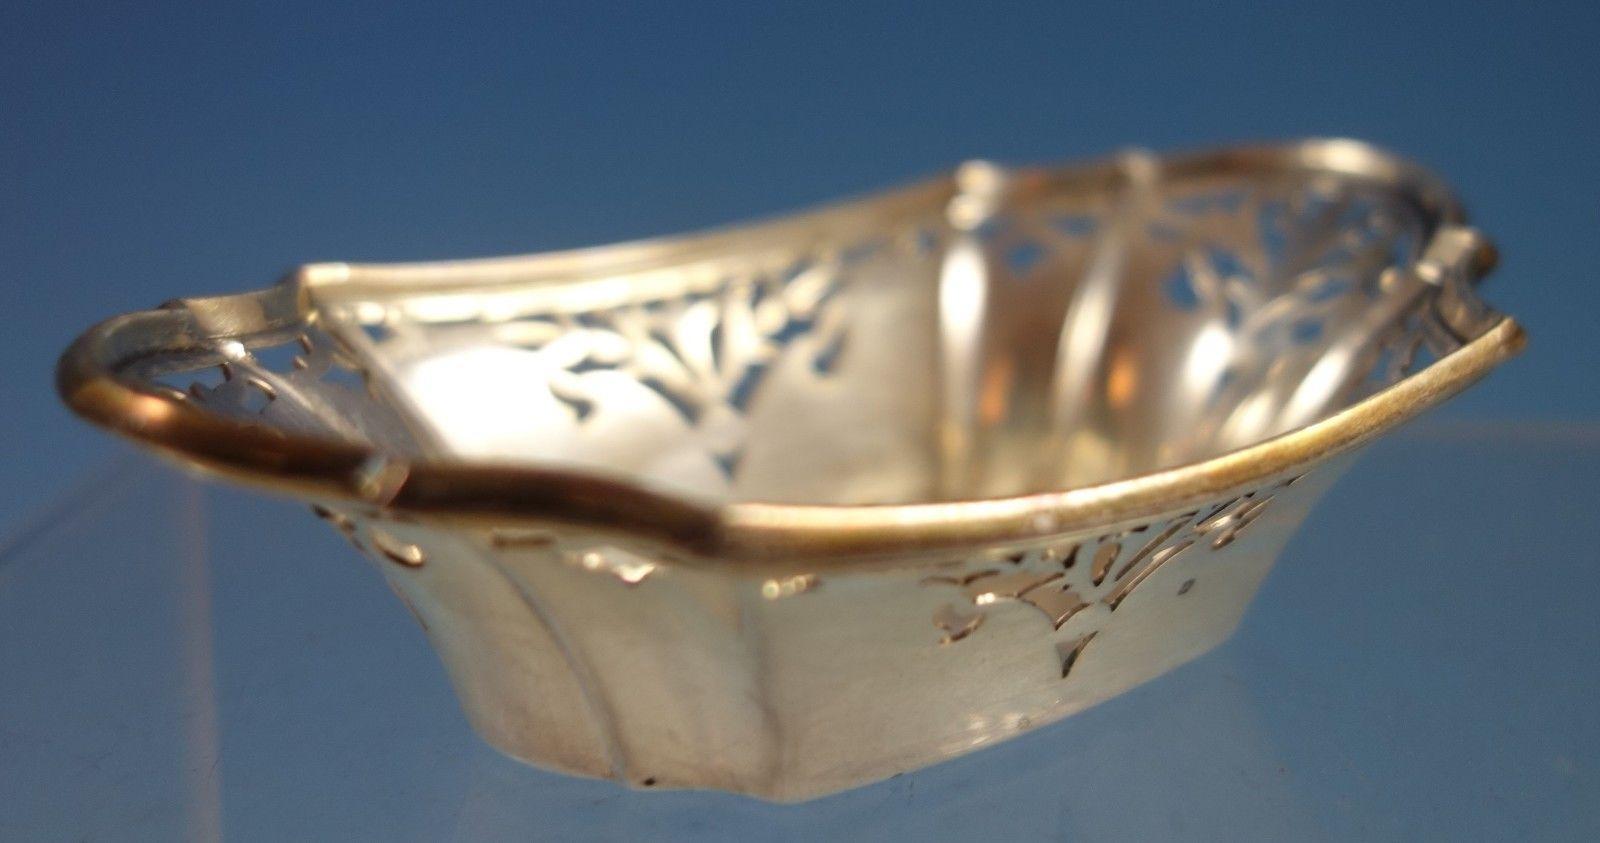 Darling King George by Watson sterling silver nut dish. The dish has an exquisite pierced border, and it is marked with #5559. The nut dish measures 3/4